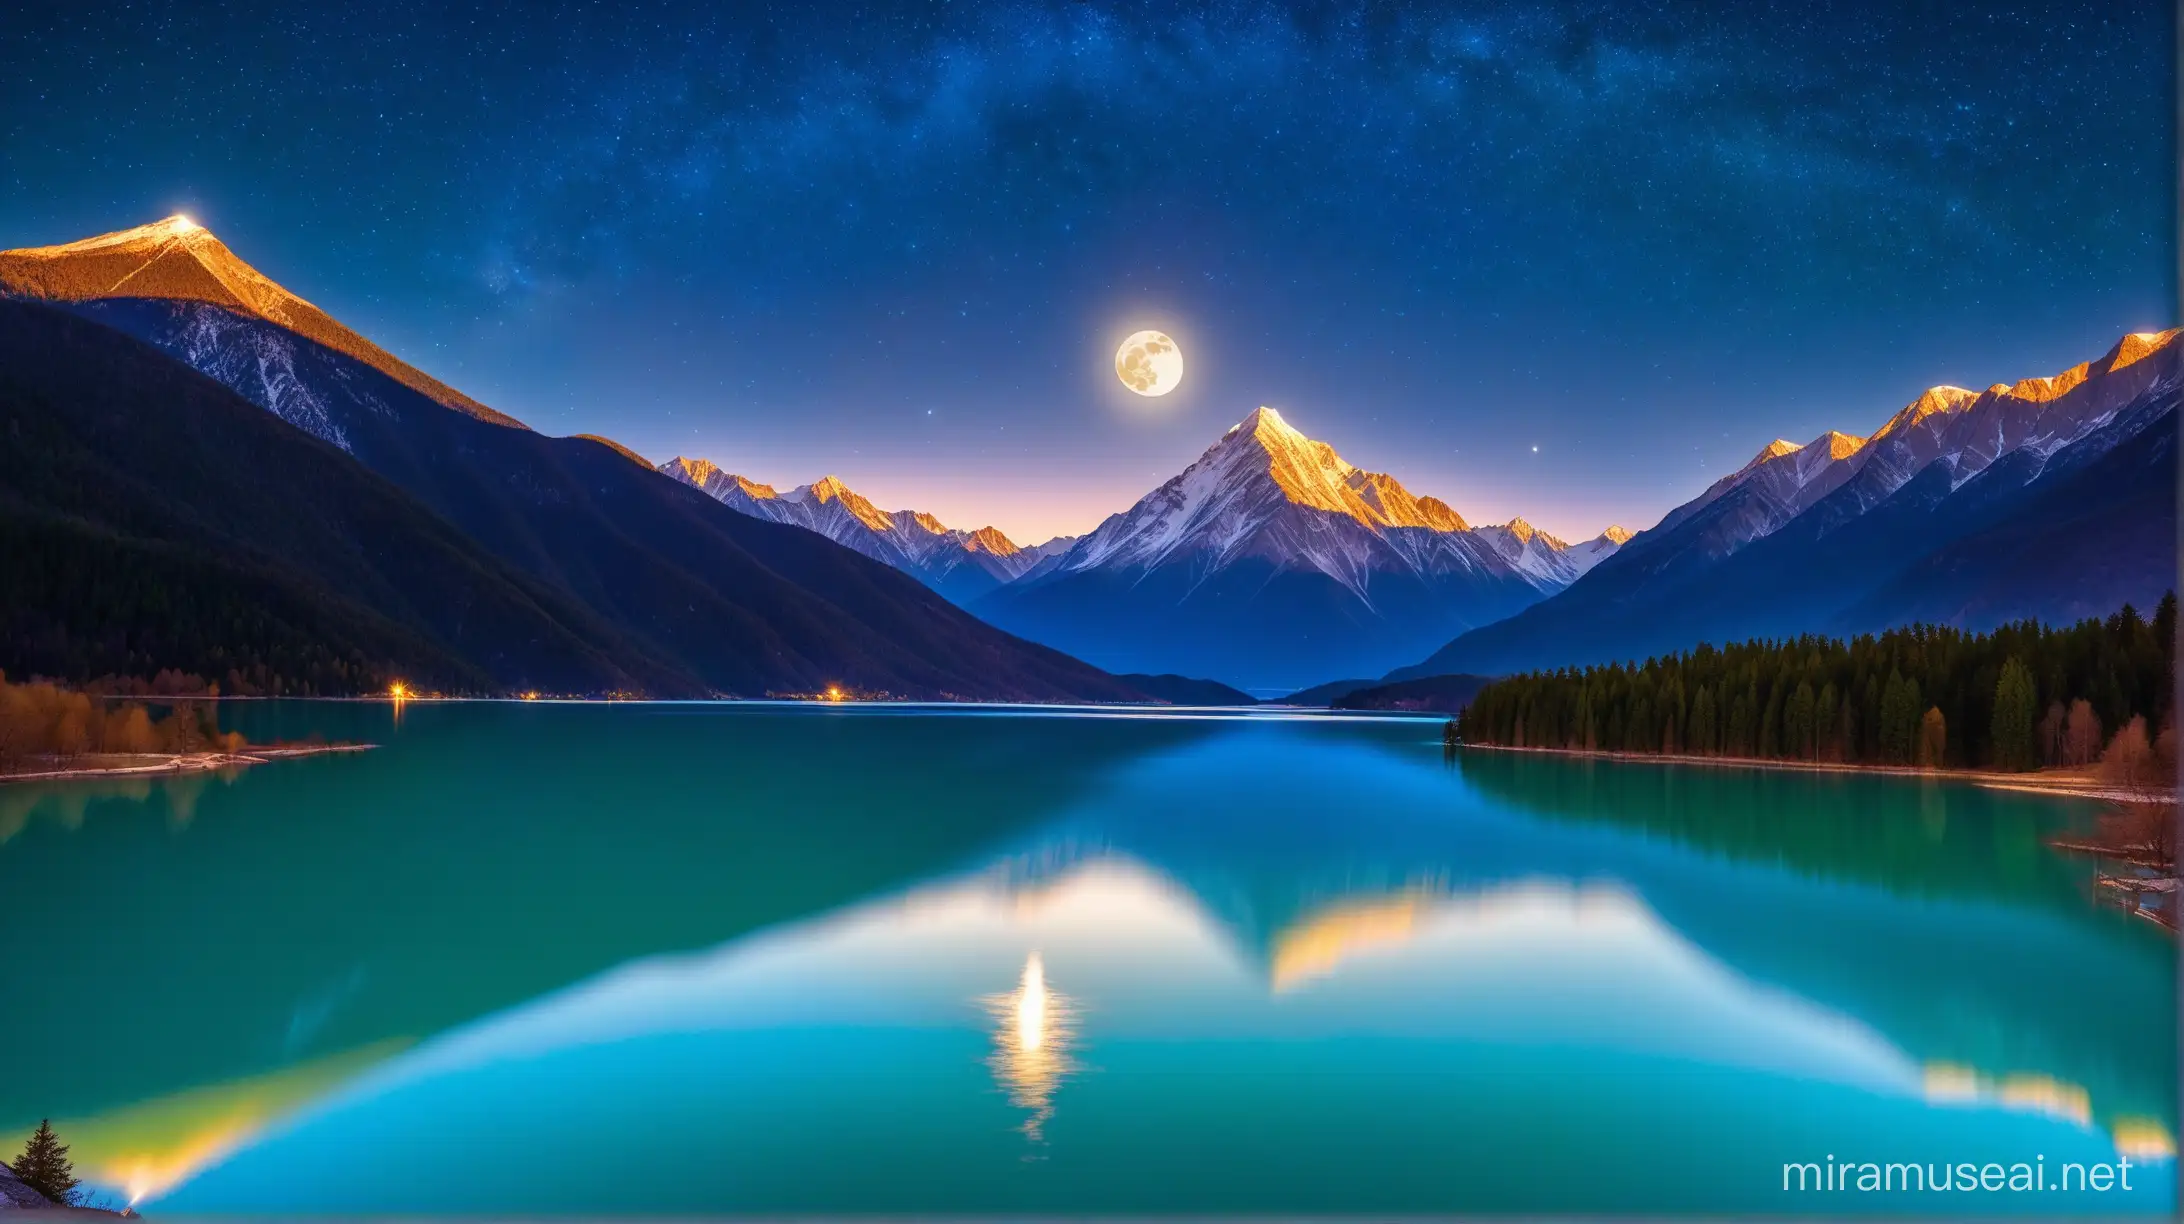 Majestic Mountain Landscape with Starlit Sky Reflected in a Tranquil Lake